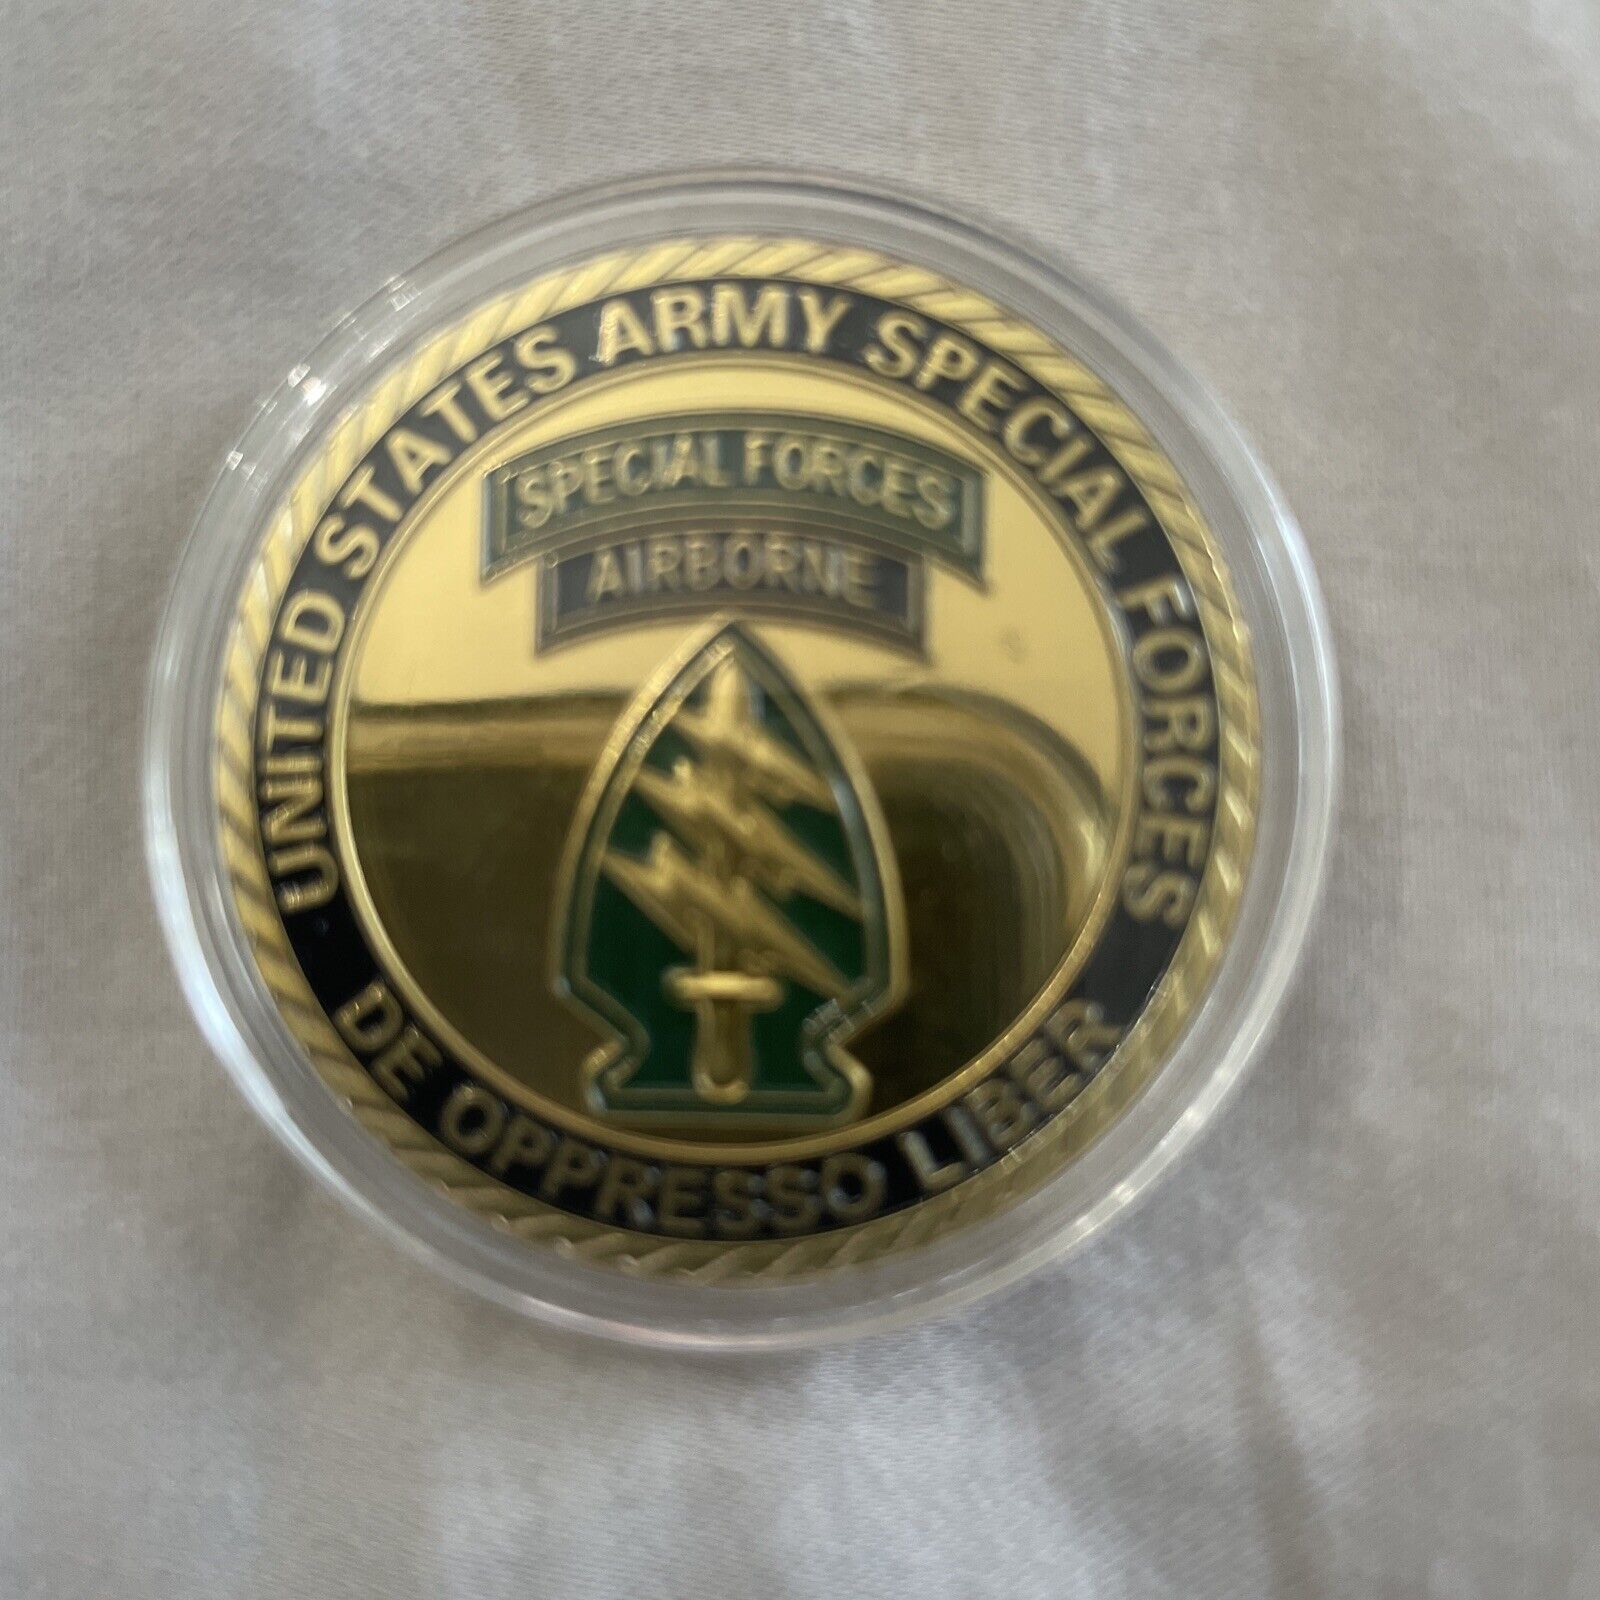 Primary image for UNITED STATES ARMY SPECIAL FORCES AIRBORNE CHALLENGE COIN